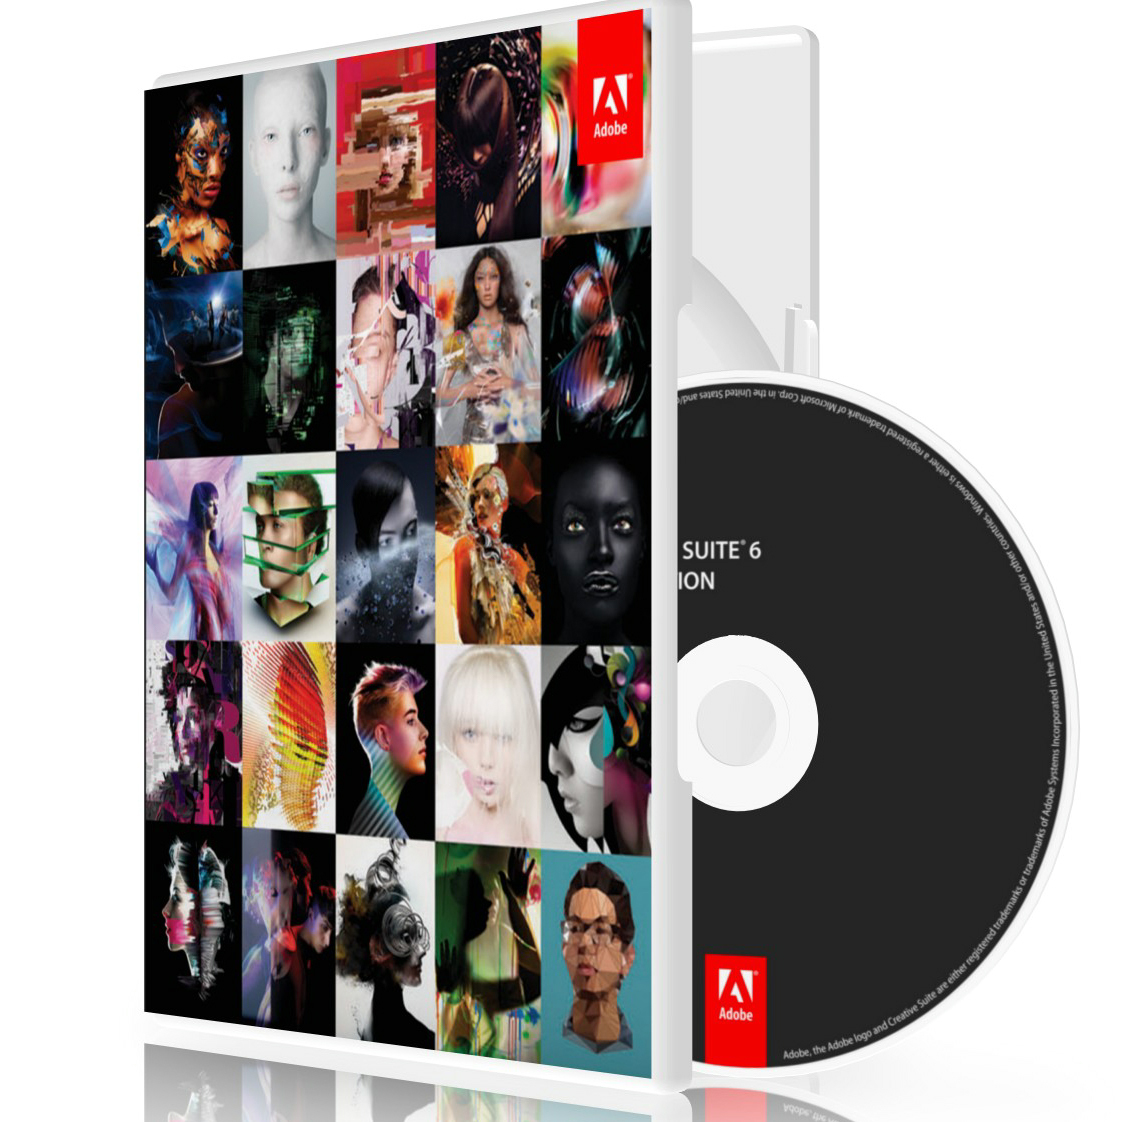 adobe creative suite 4 master collection